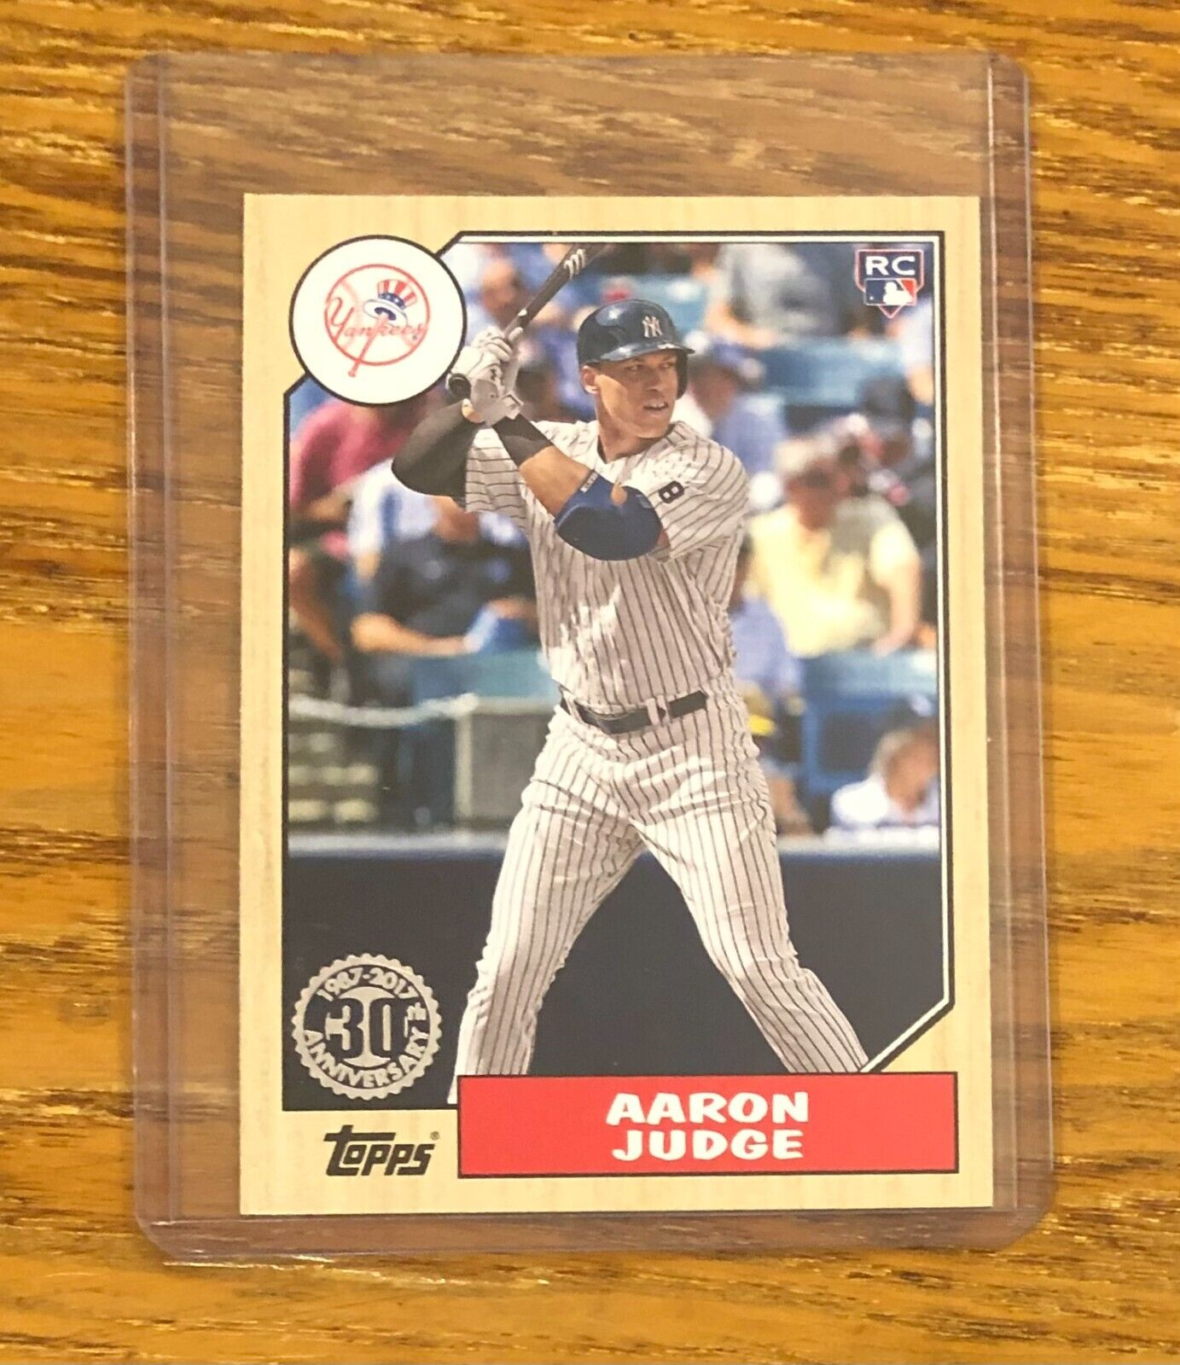 Most valuable Aaron Judge rookie cards: 2017 Topps Aaron Judge Rookie Cup Card #87 